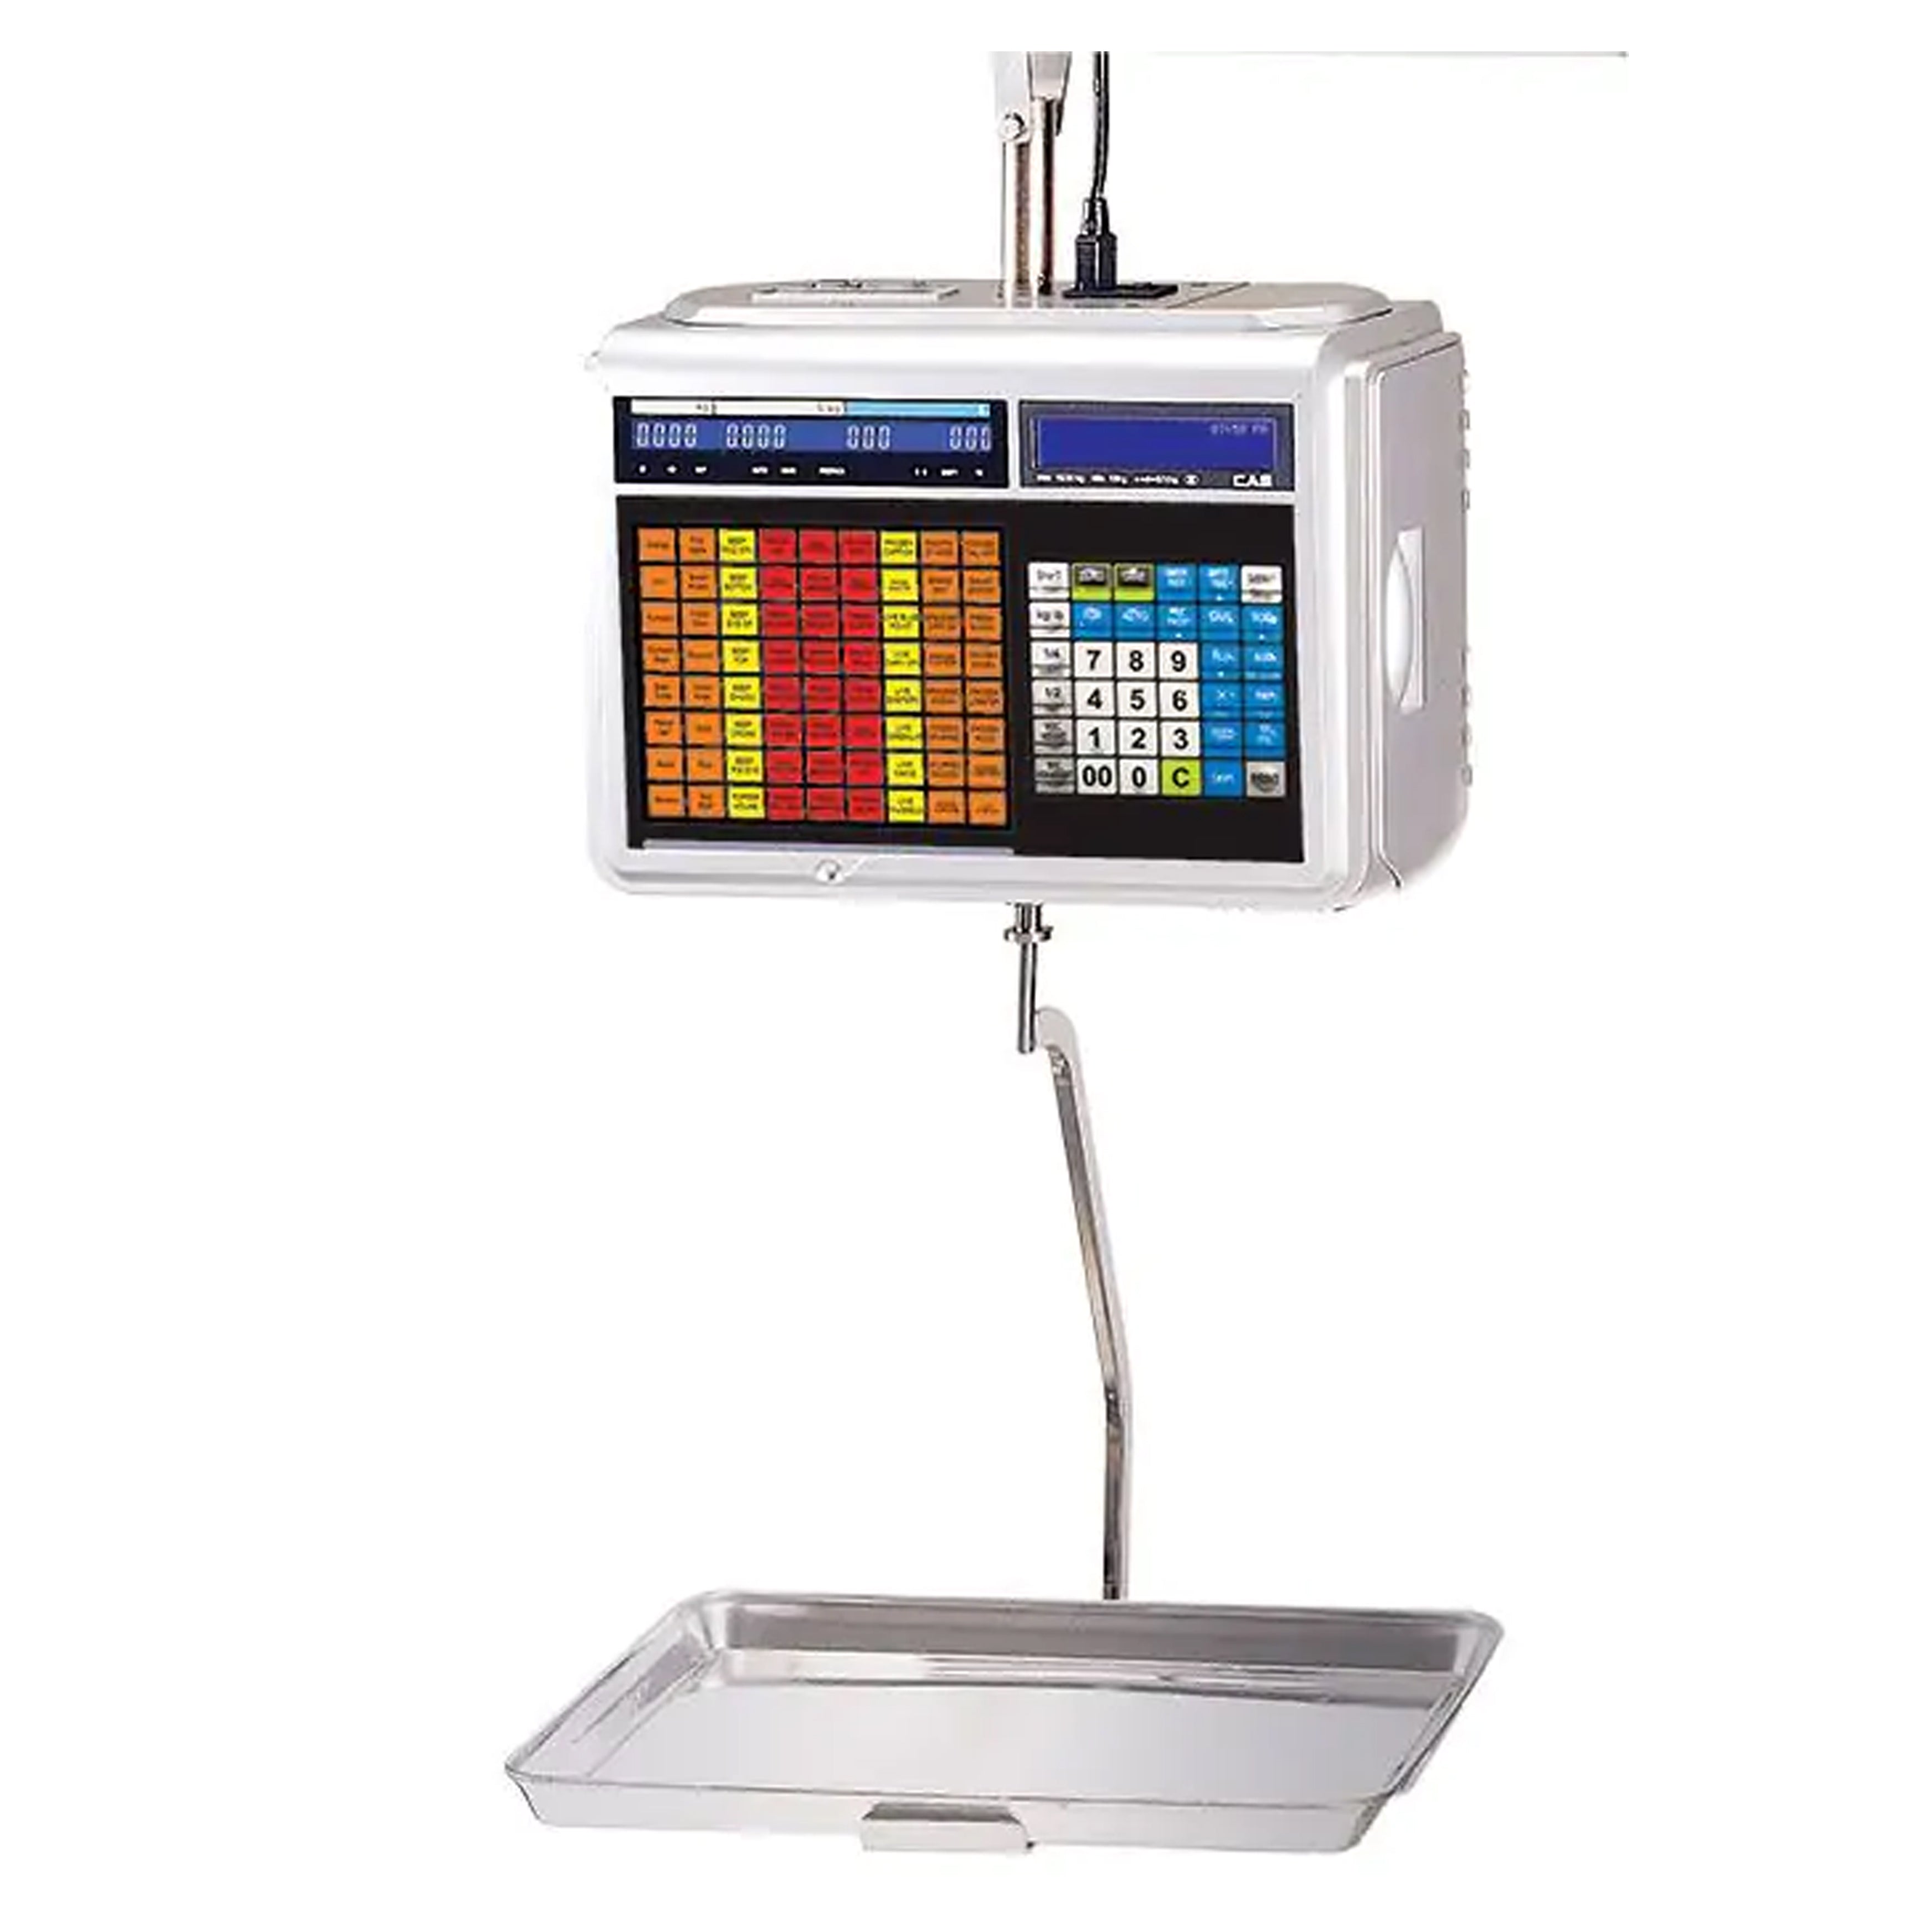 CL5500H Label Printing Scales